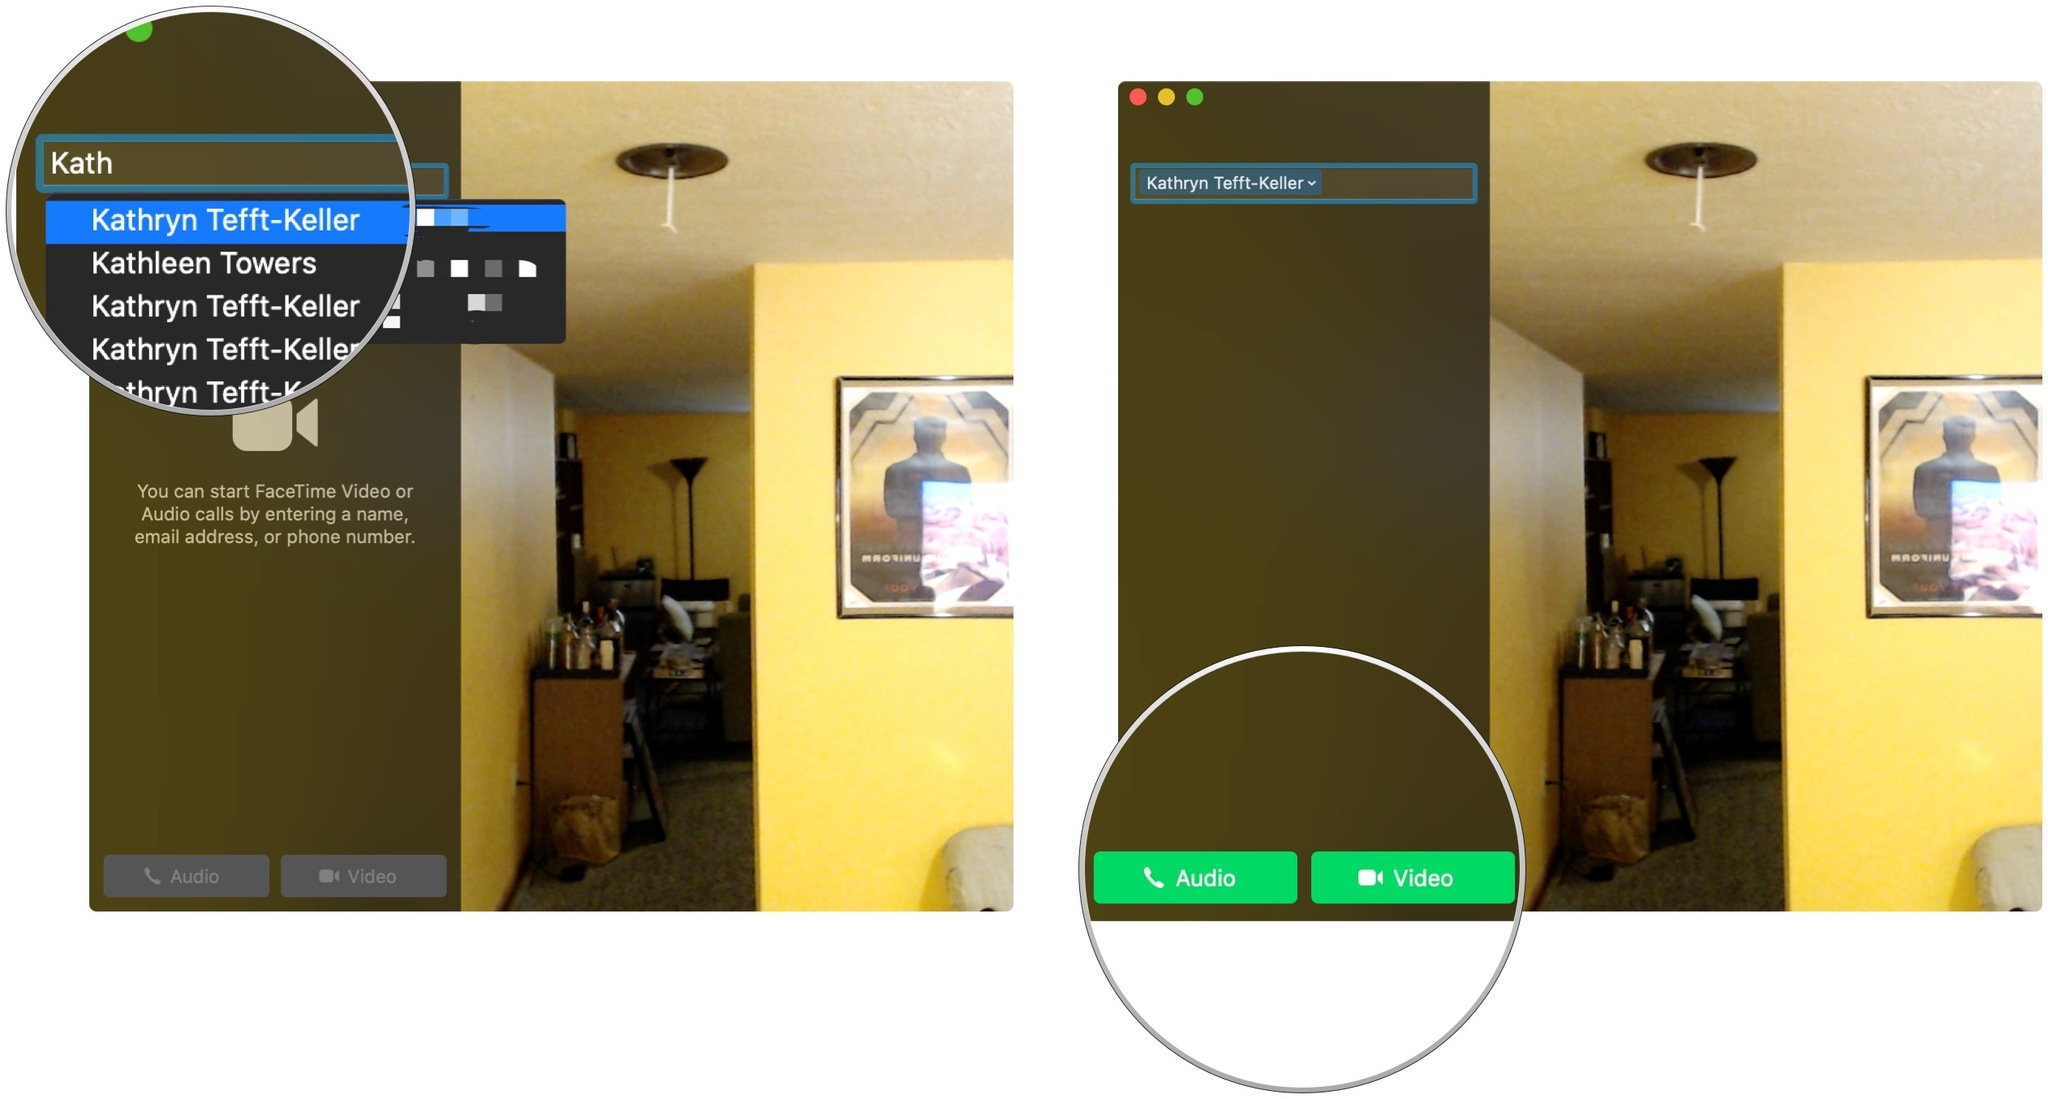 Place a FaceTime call, showing how to enter a name, number, or email address, then how to click Audio or Video